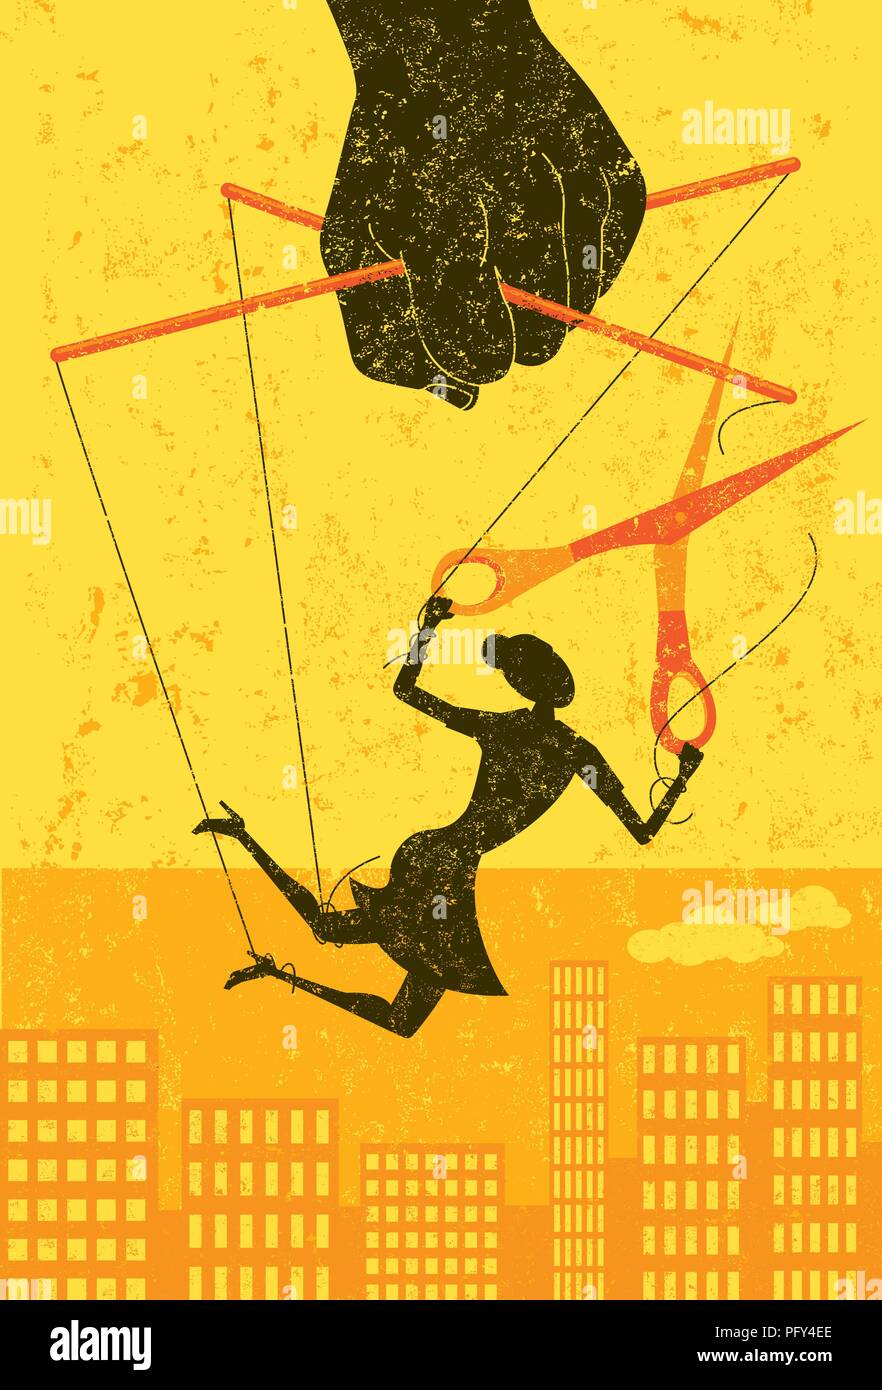 Escaping a controlling boss. A businesswoman, portrayed as a puppet on a string, cuts herself away from manipulative control to gain her freedom. Stock Vector